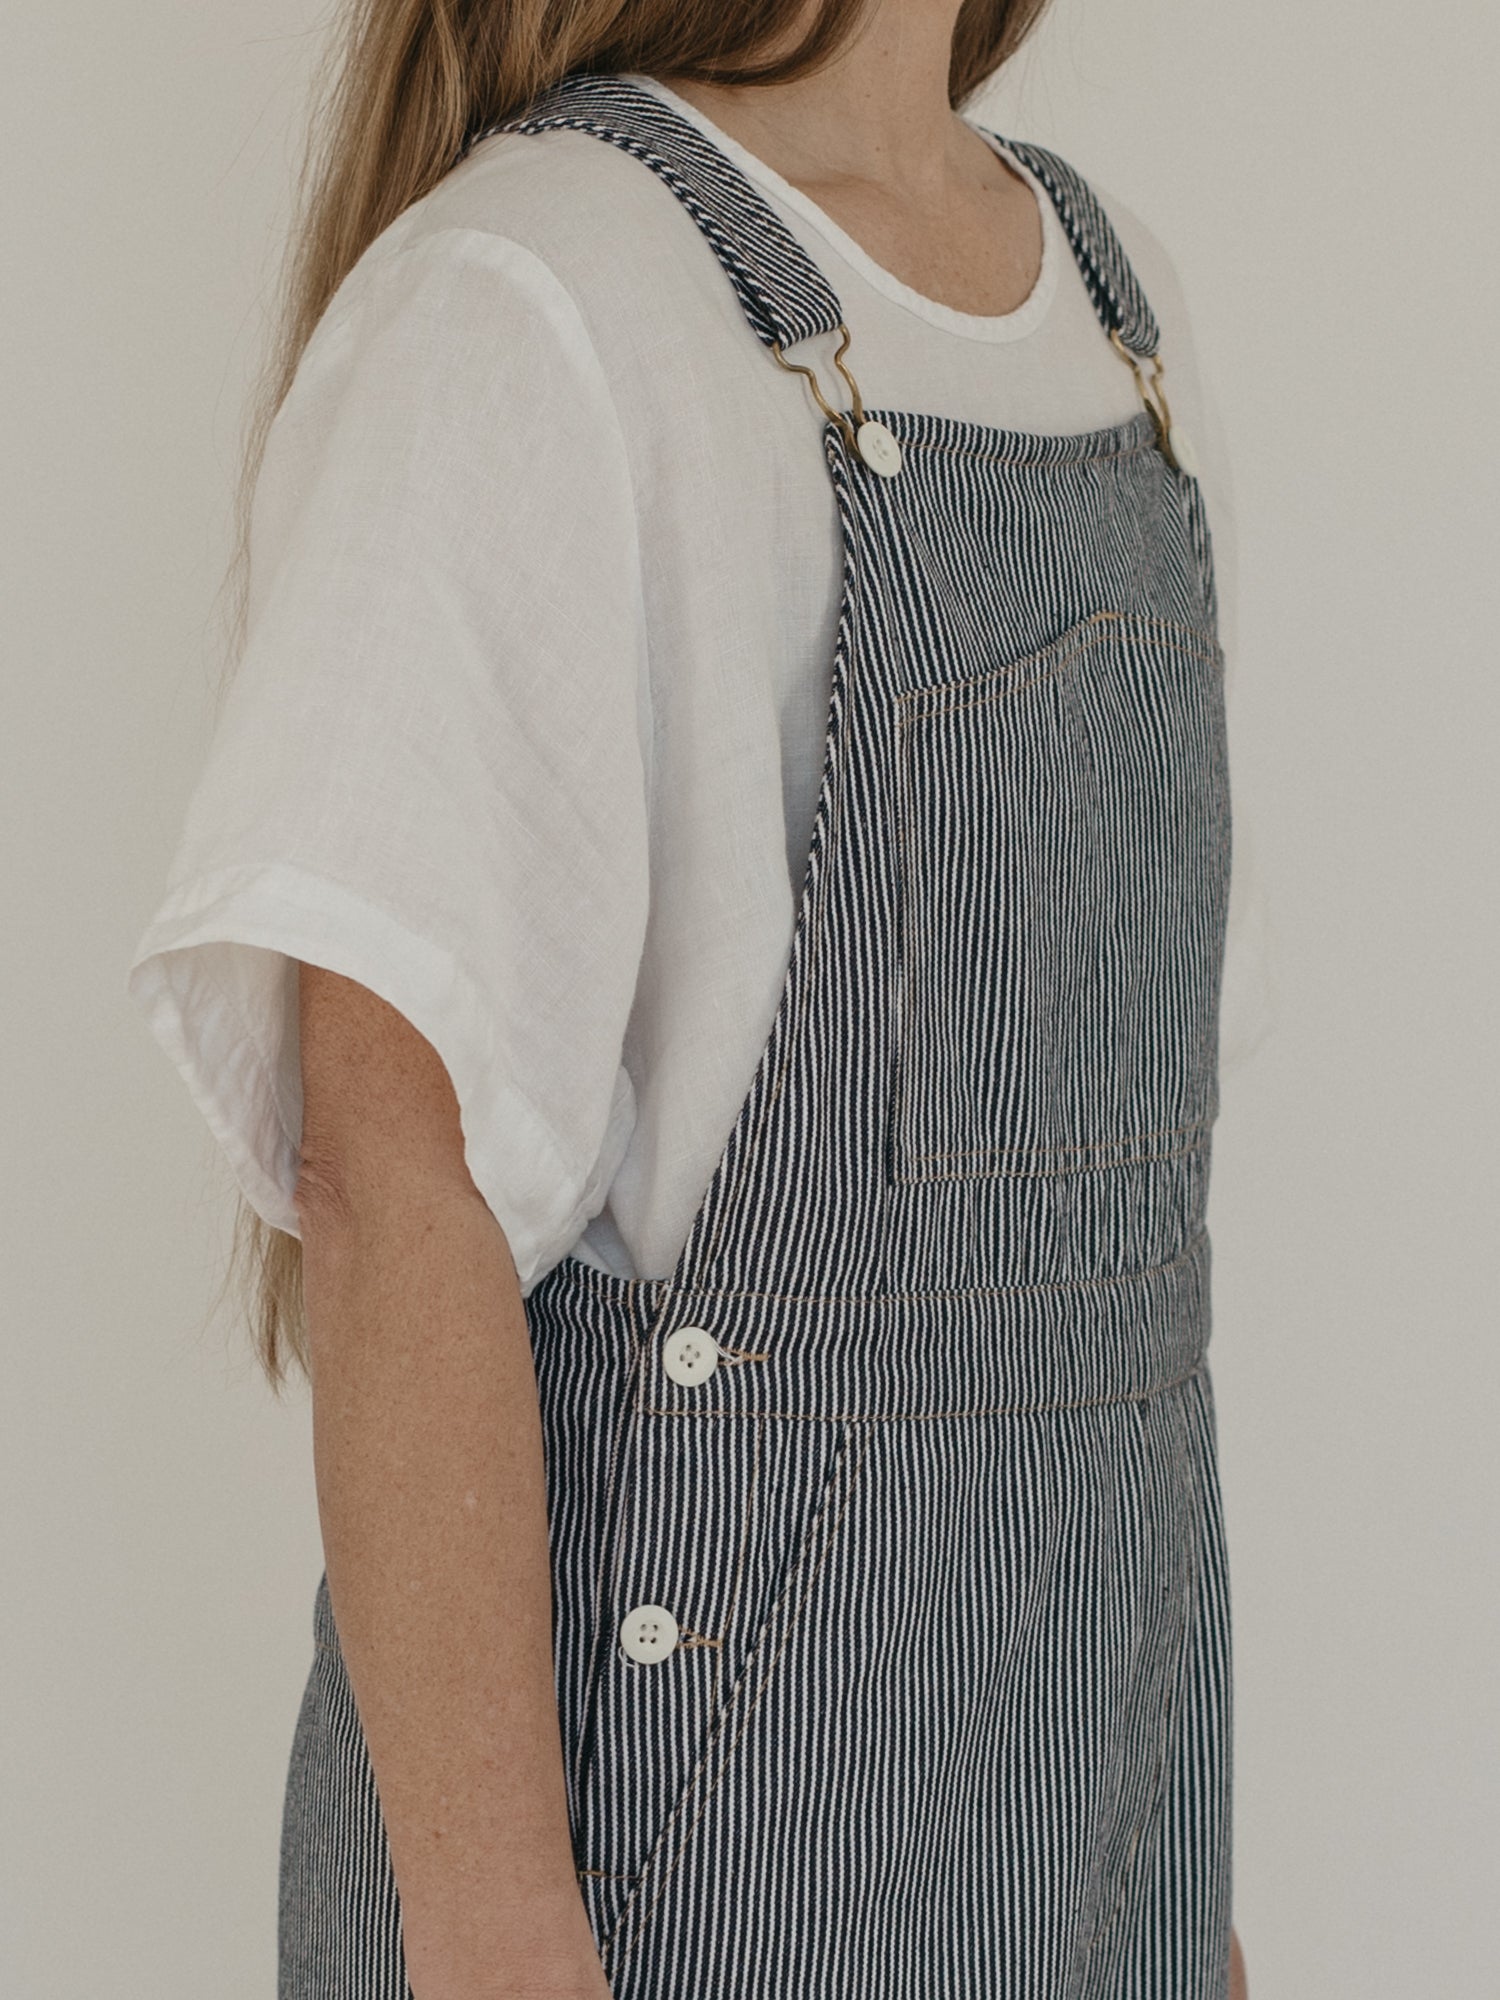 Henry Overalls in Railroad